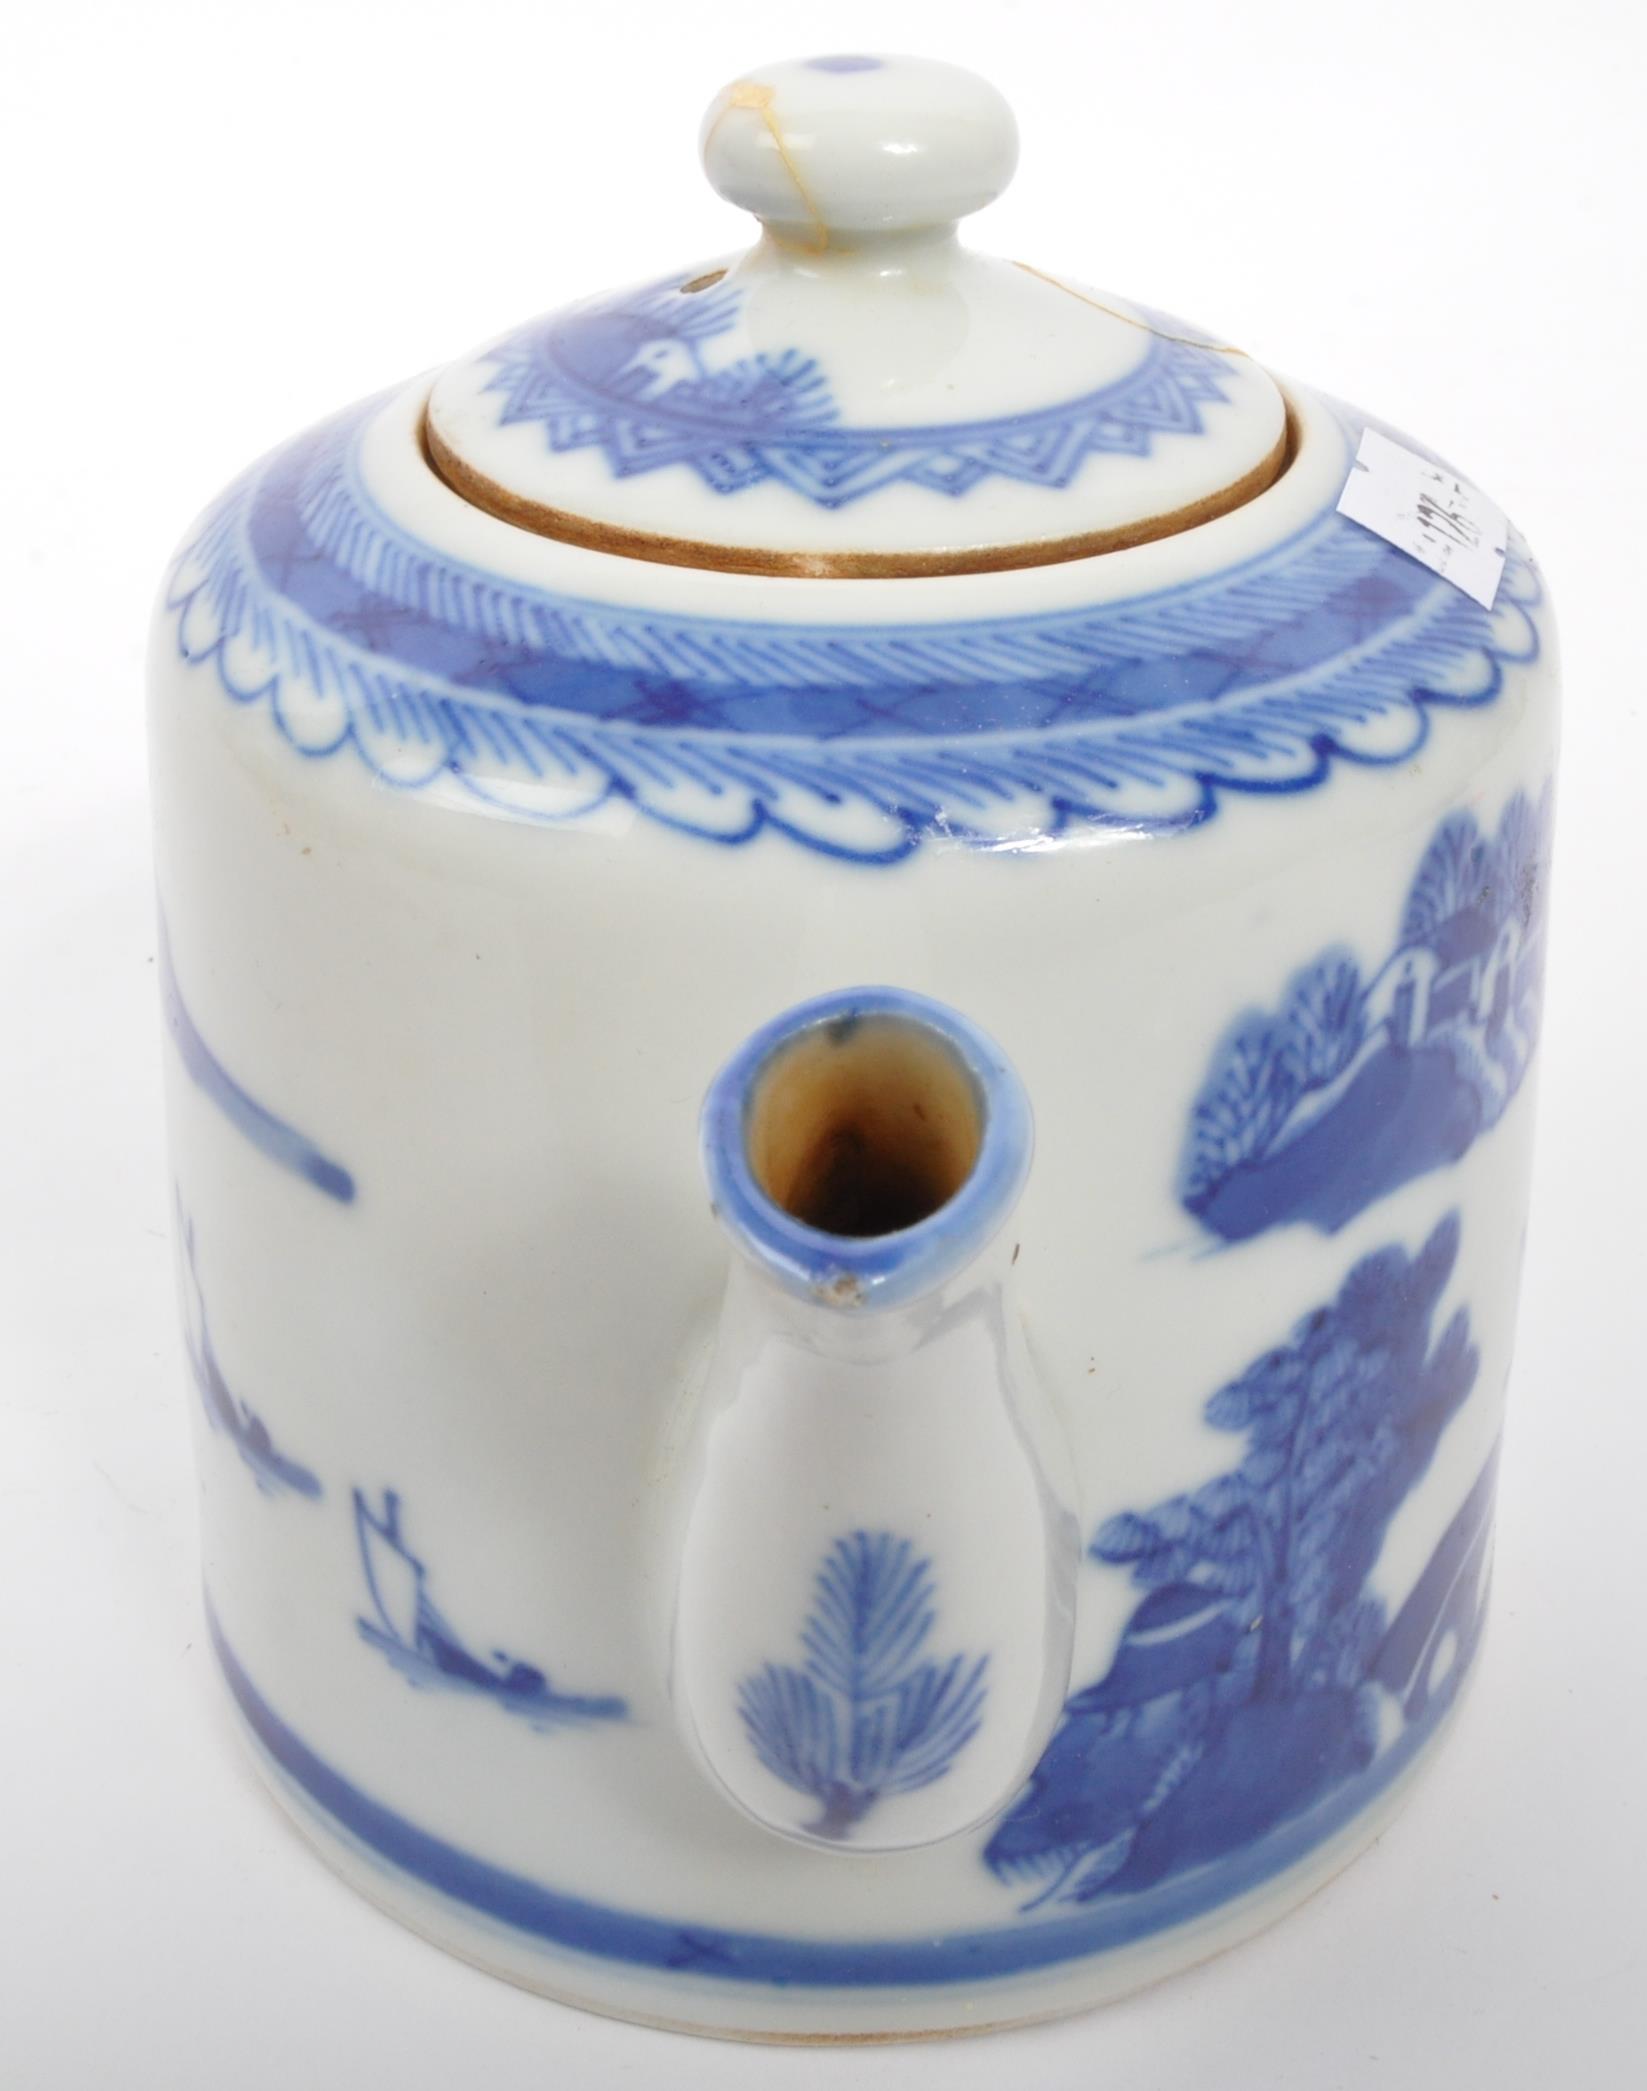 AN 18TH CENTURY CHINESE BLUE & WHITE PORCELAIN TEAPOT - Image 5 of 5